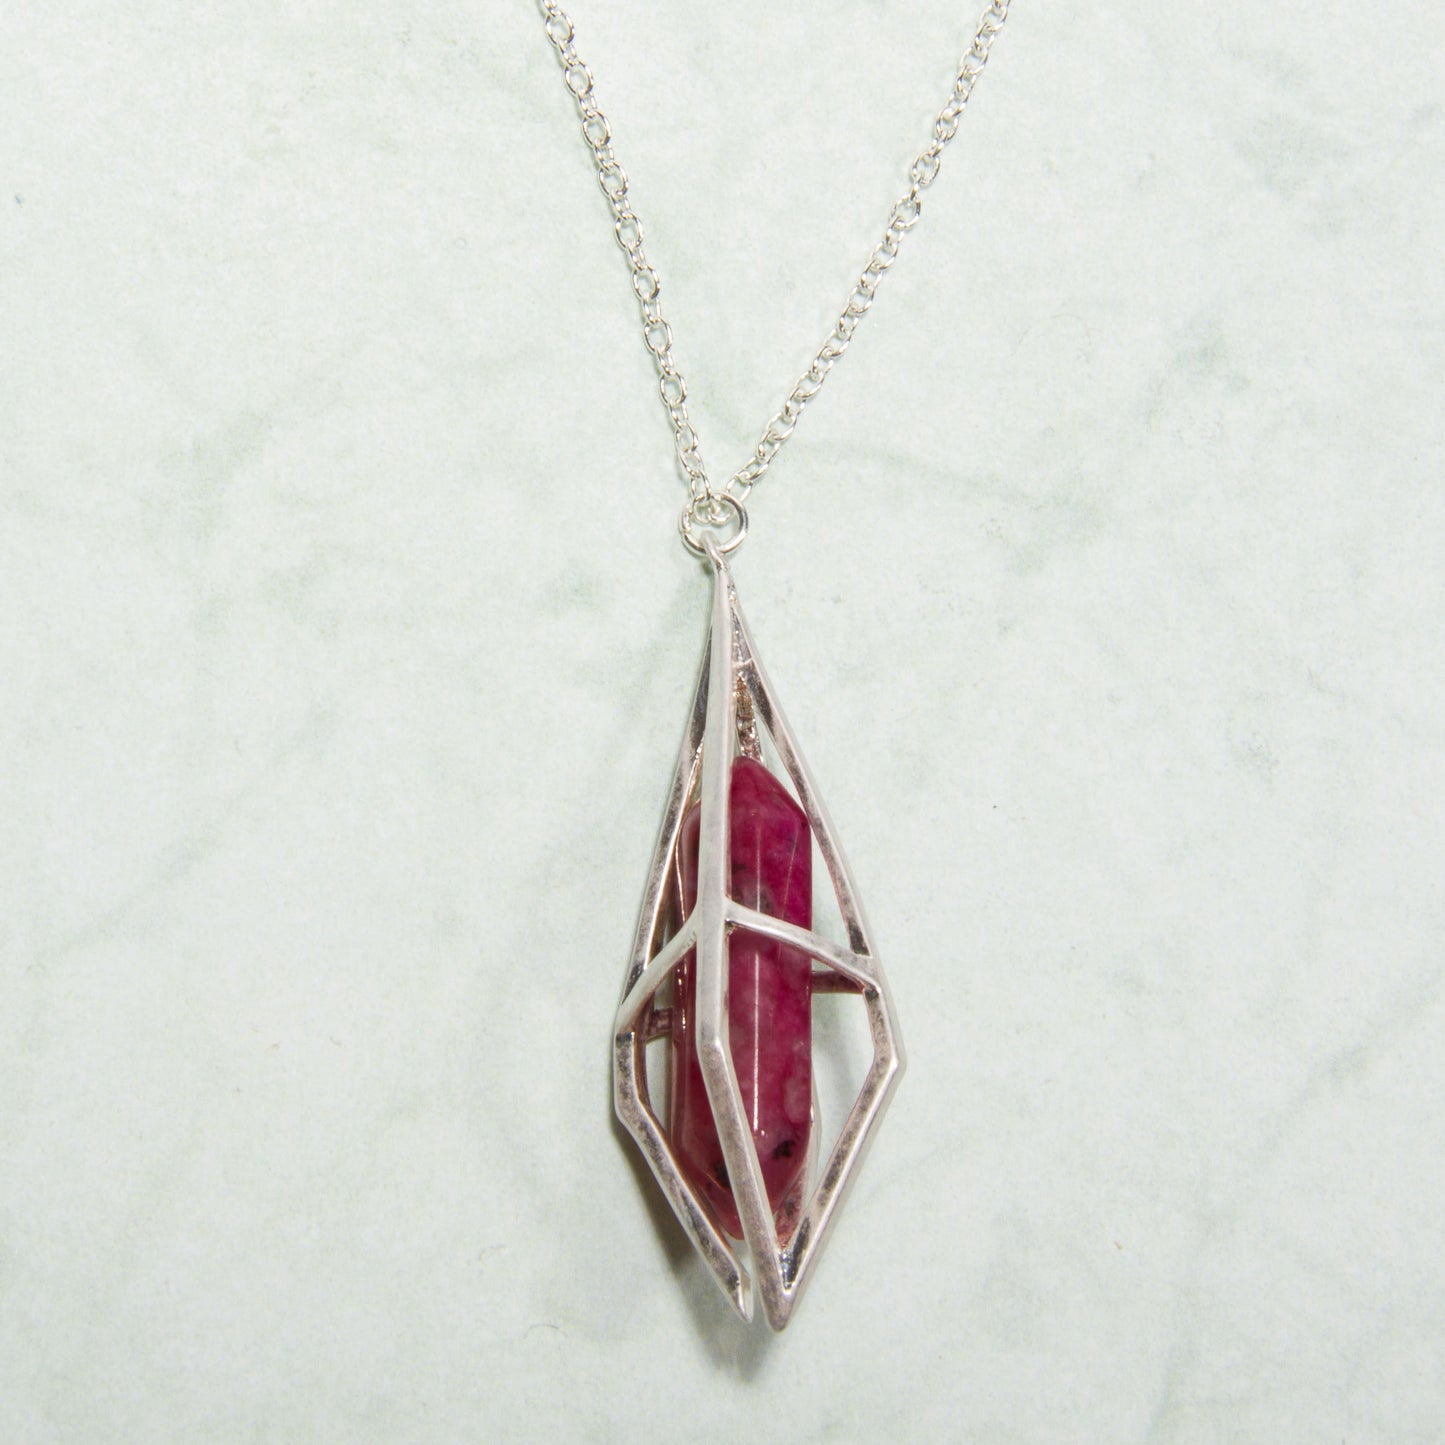 N3282-RD 24" Red Stone in Silver Cage Necklace